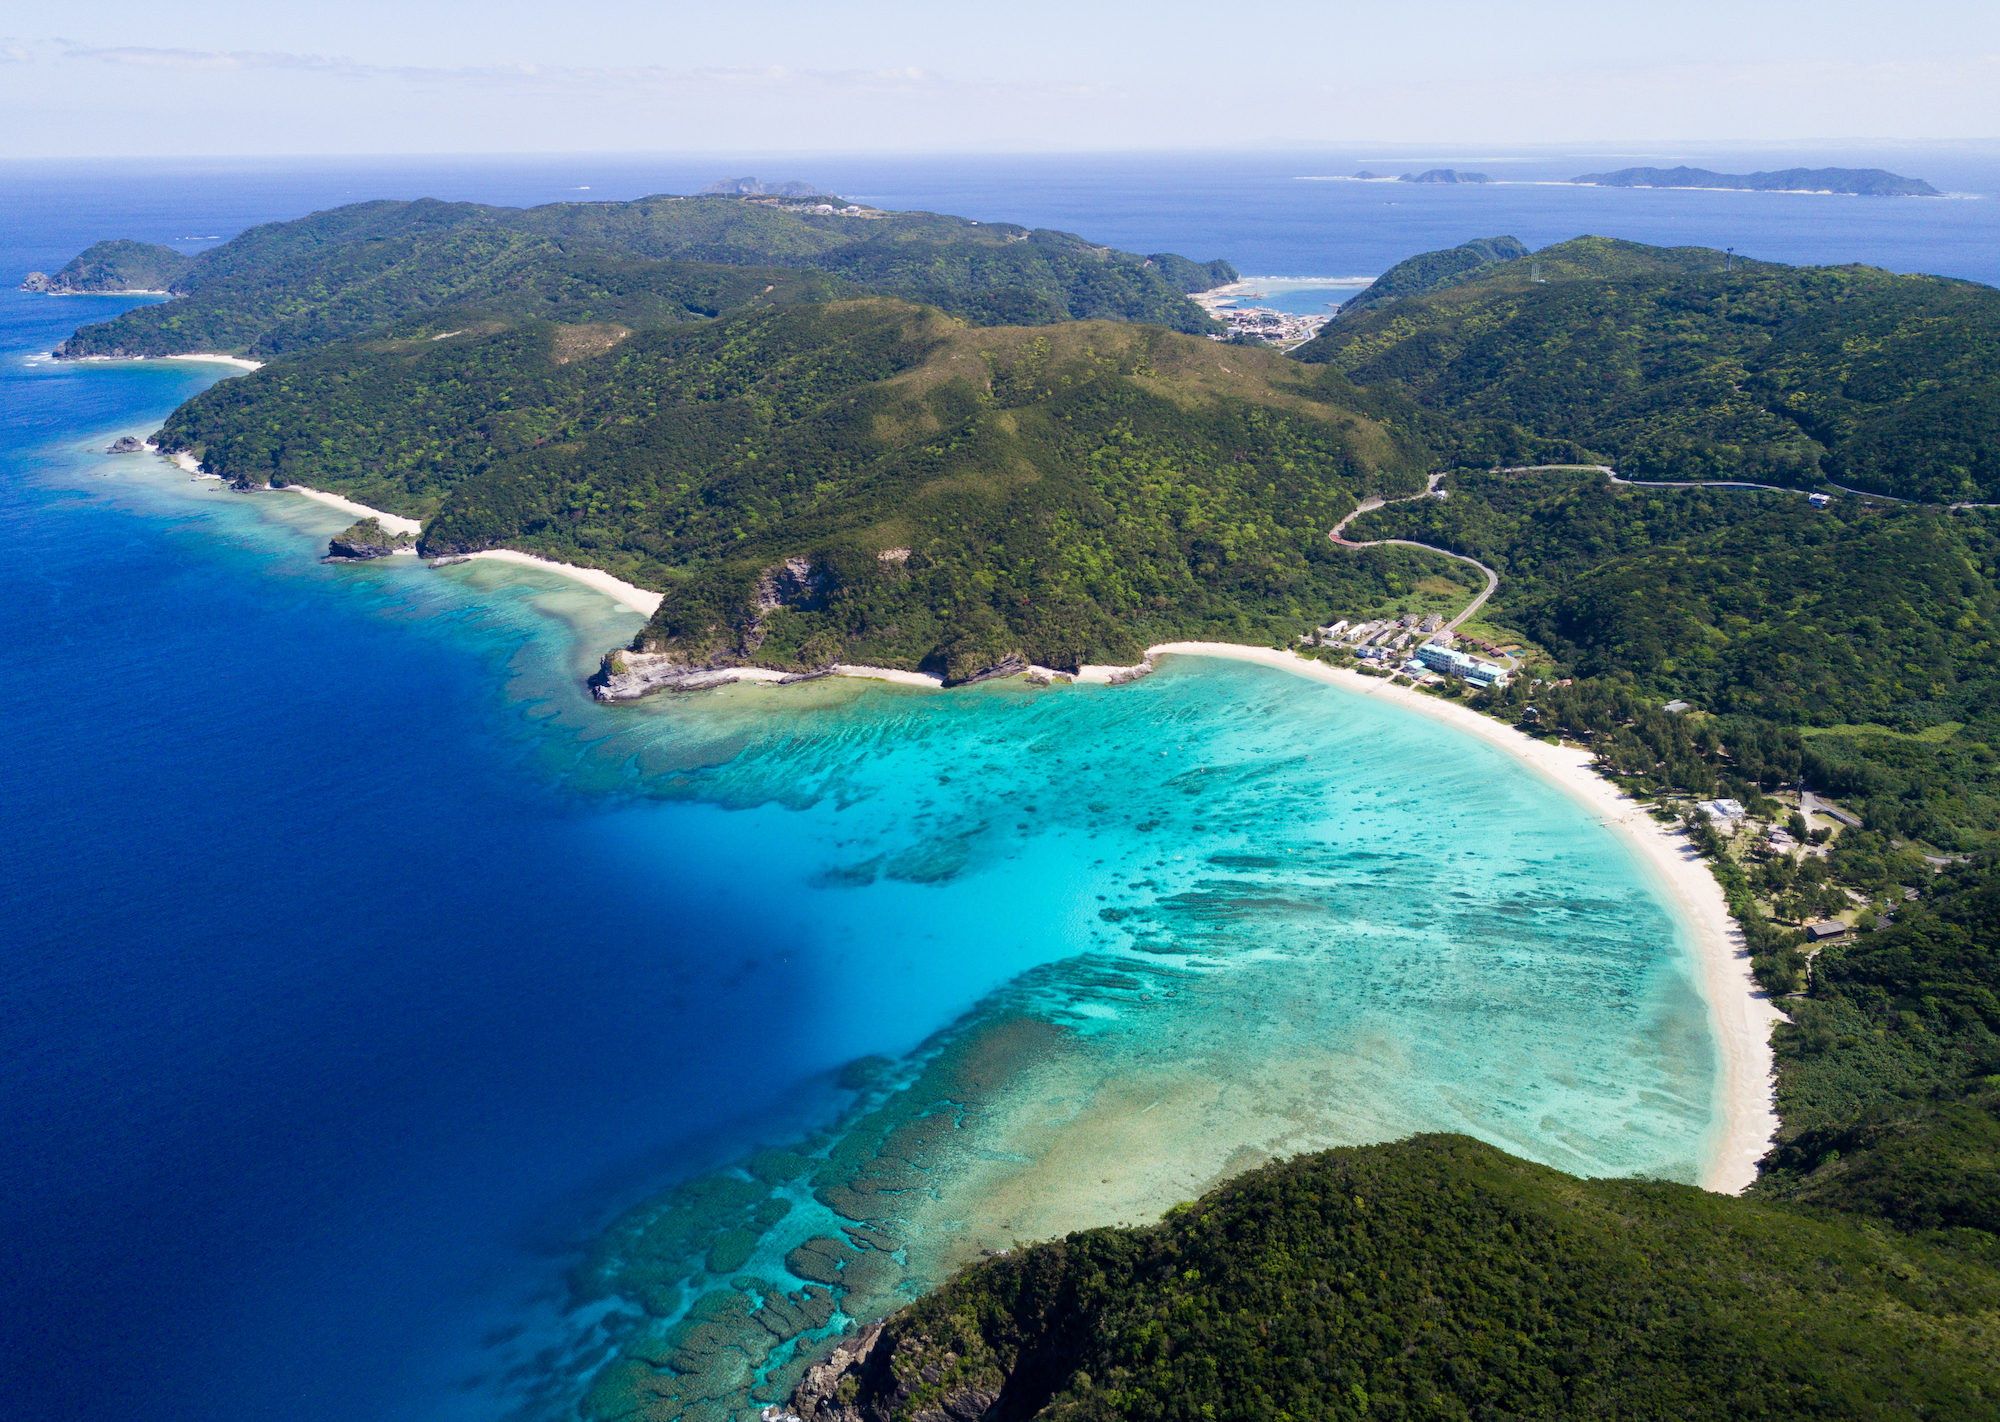 A topside aerial view of the white sands and blue water around Okinawa, Japan, one of the best shore diving destinations